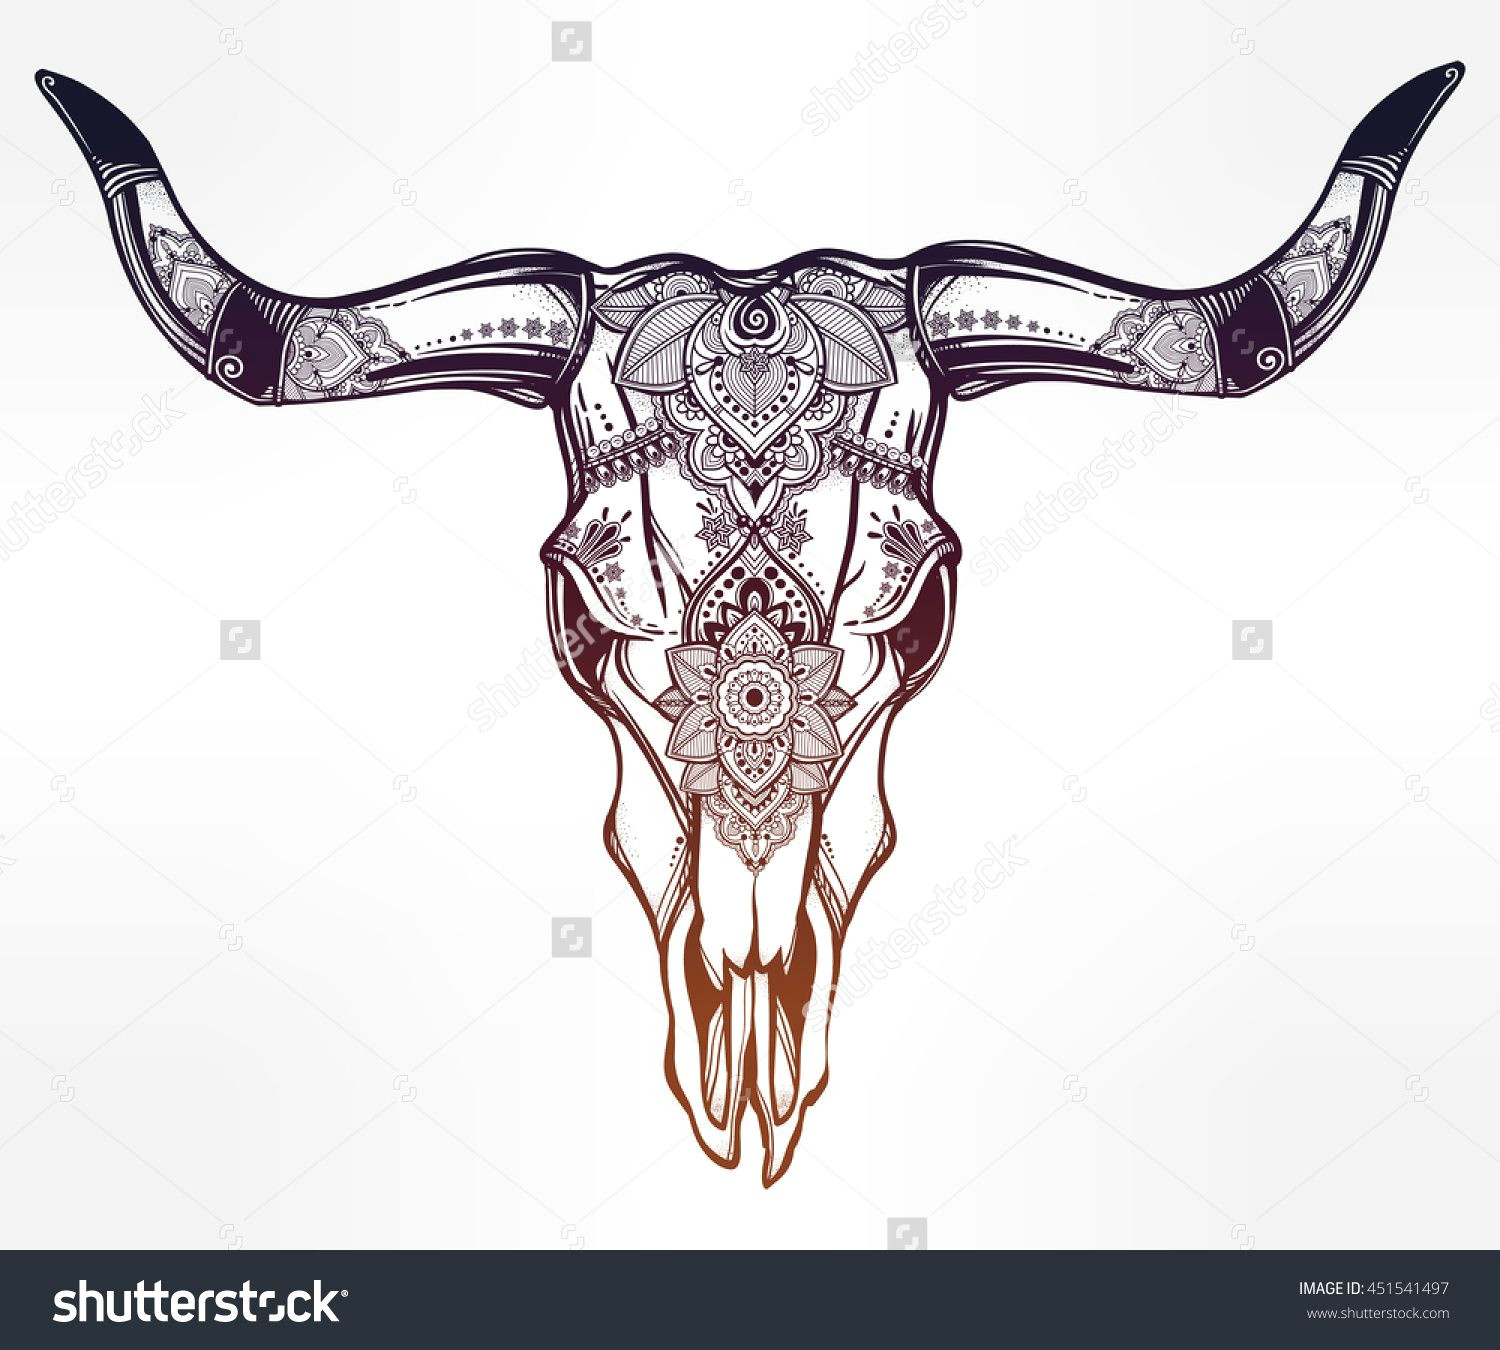 Drawing Cow Skull Hand Drawn Romantic Tattoo Style ornate Decorative Desert Cow or